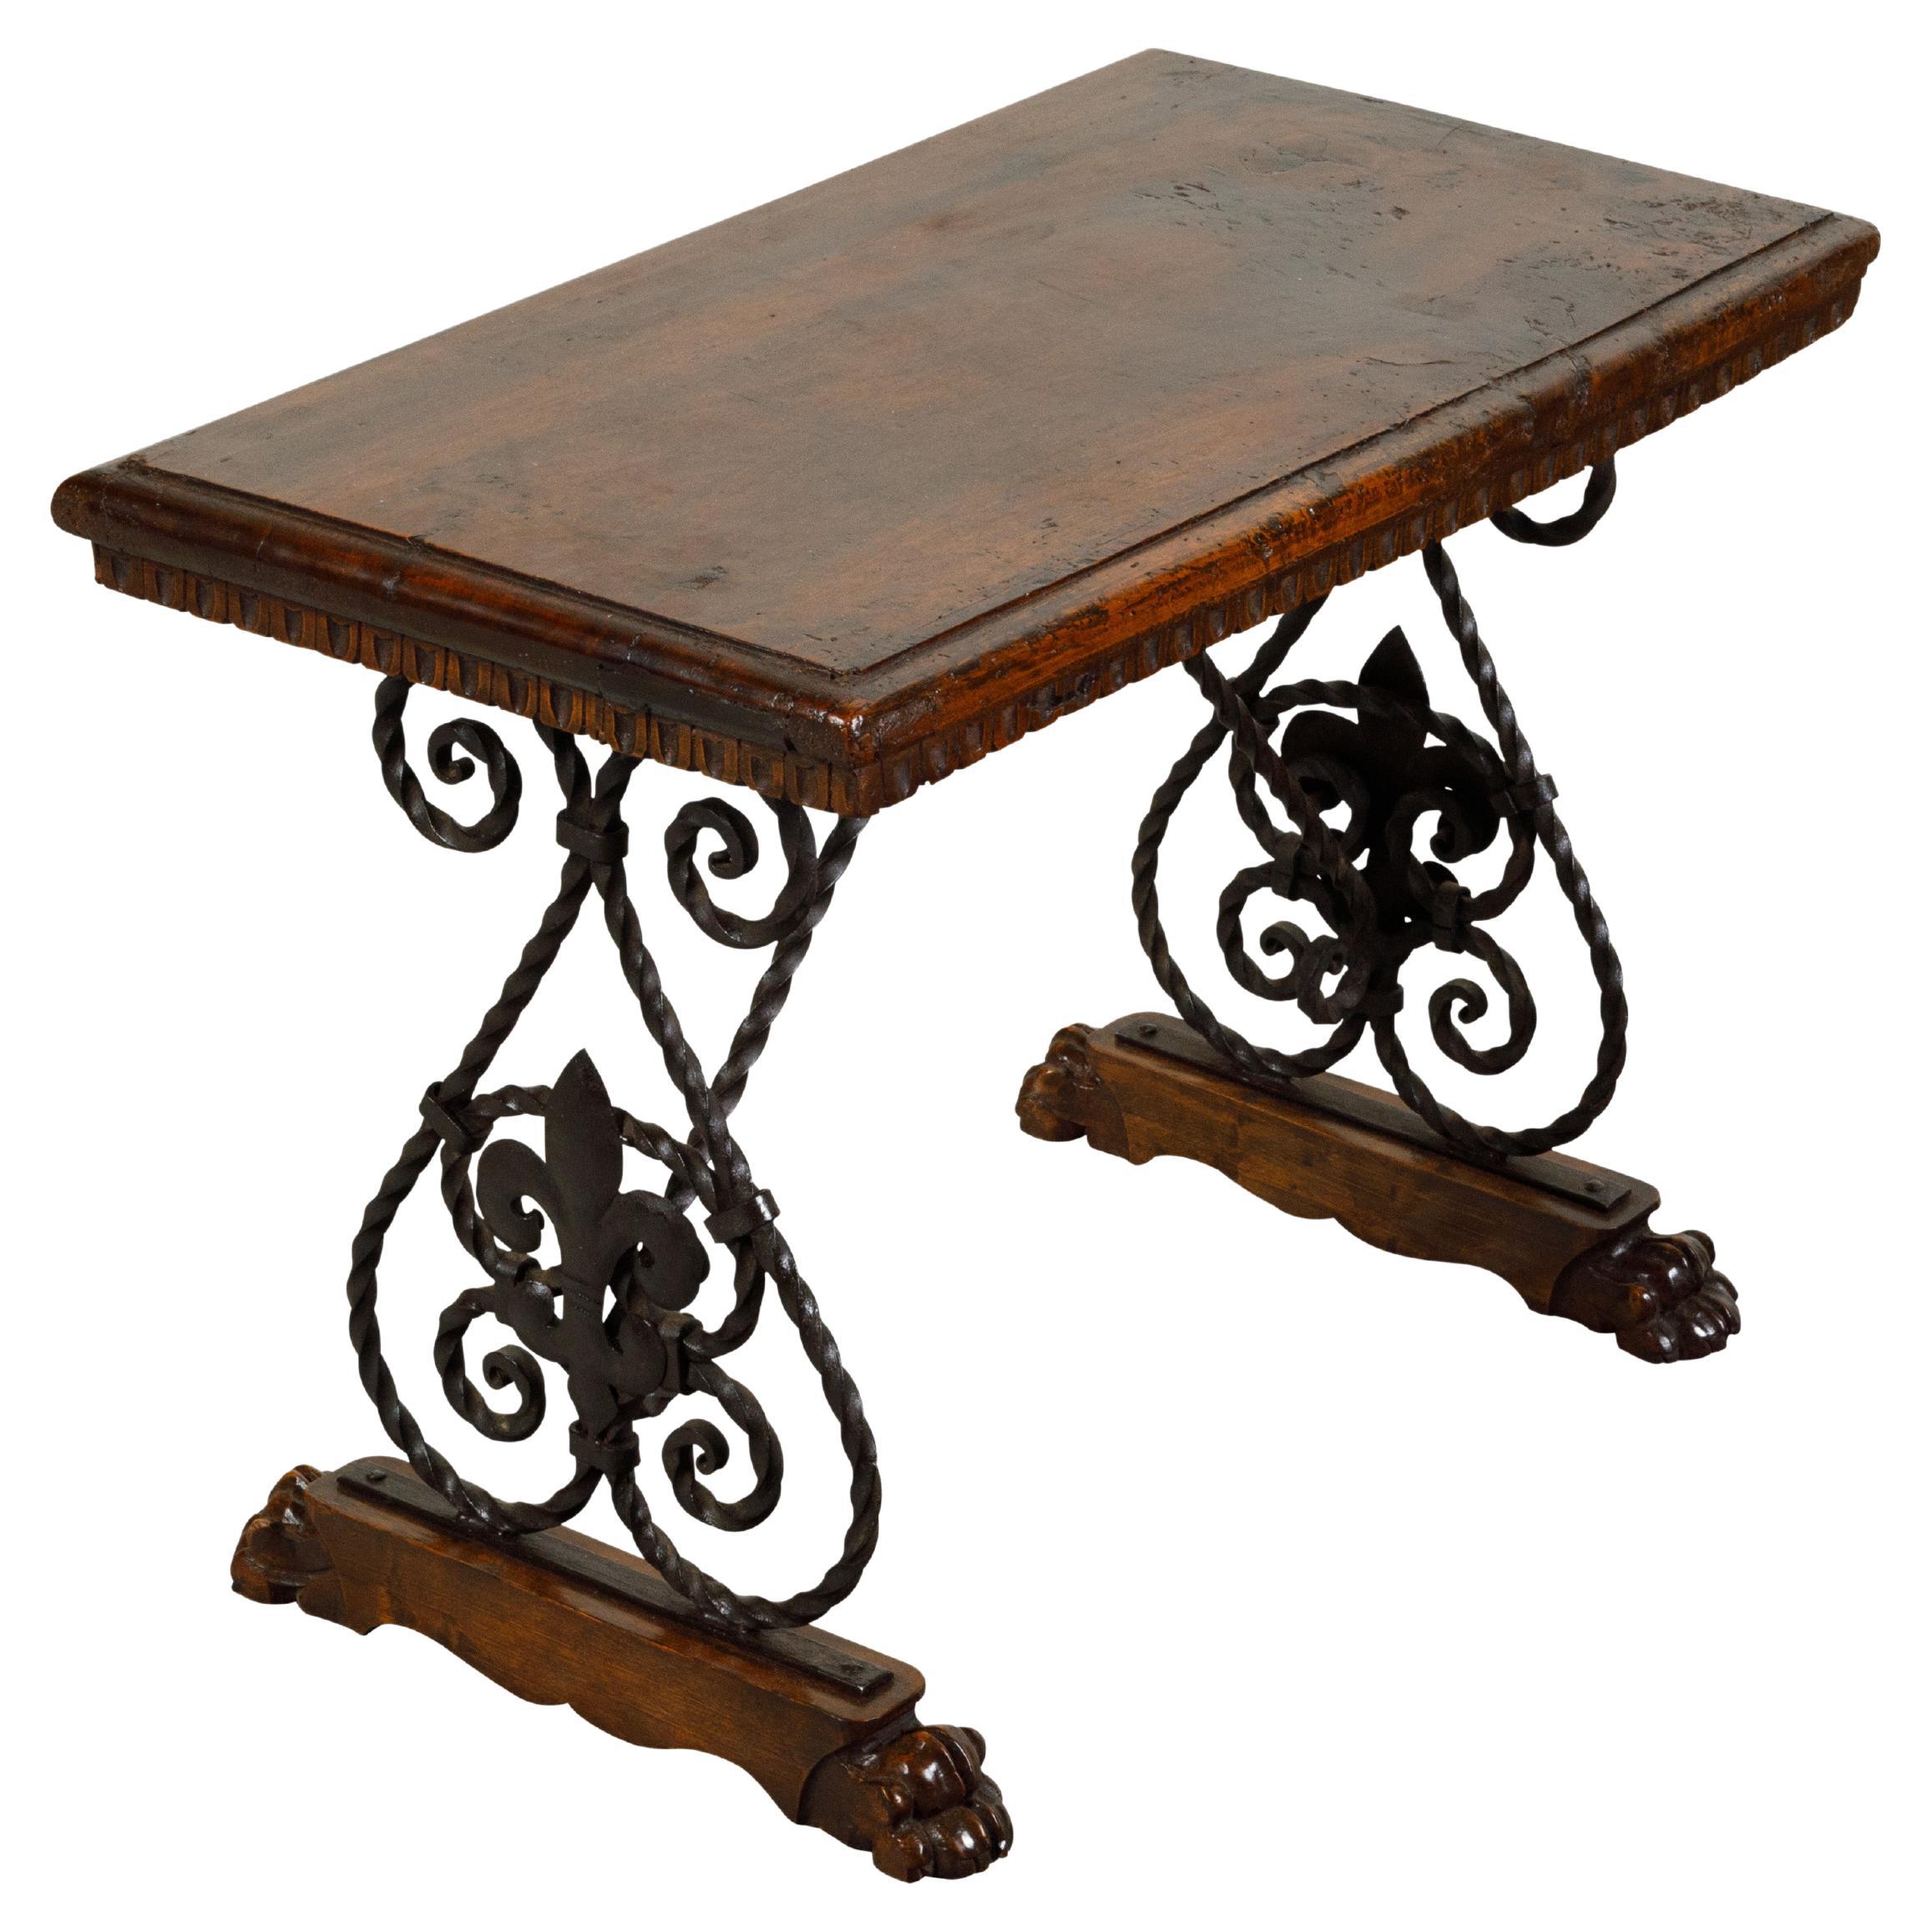 Italian 1900s Walnut Top Console Table with Iron Base and Fleur de Lys Motifs For Sale